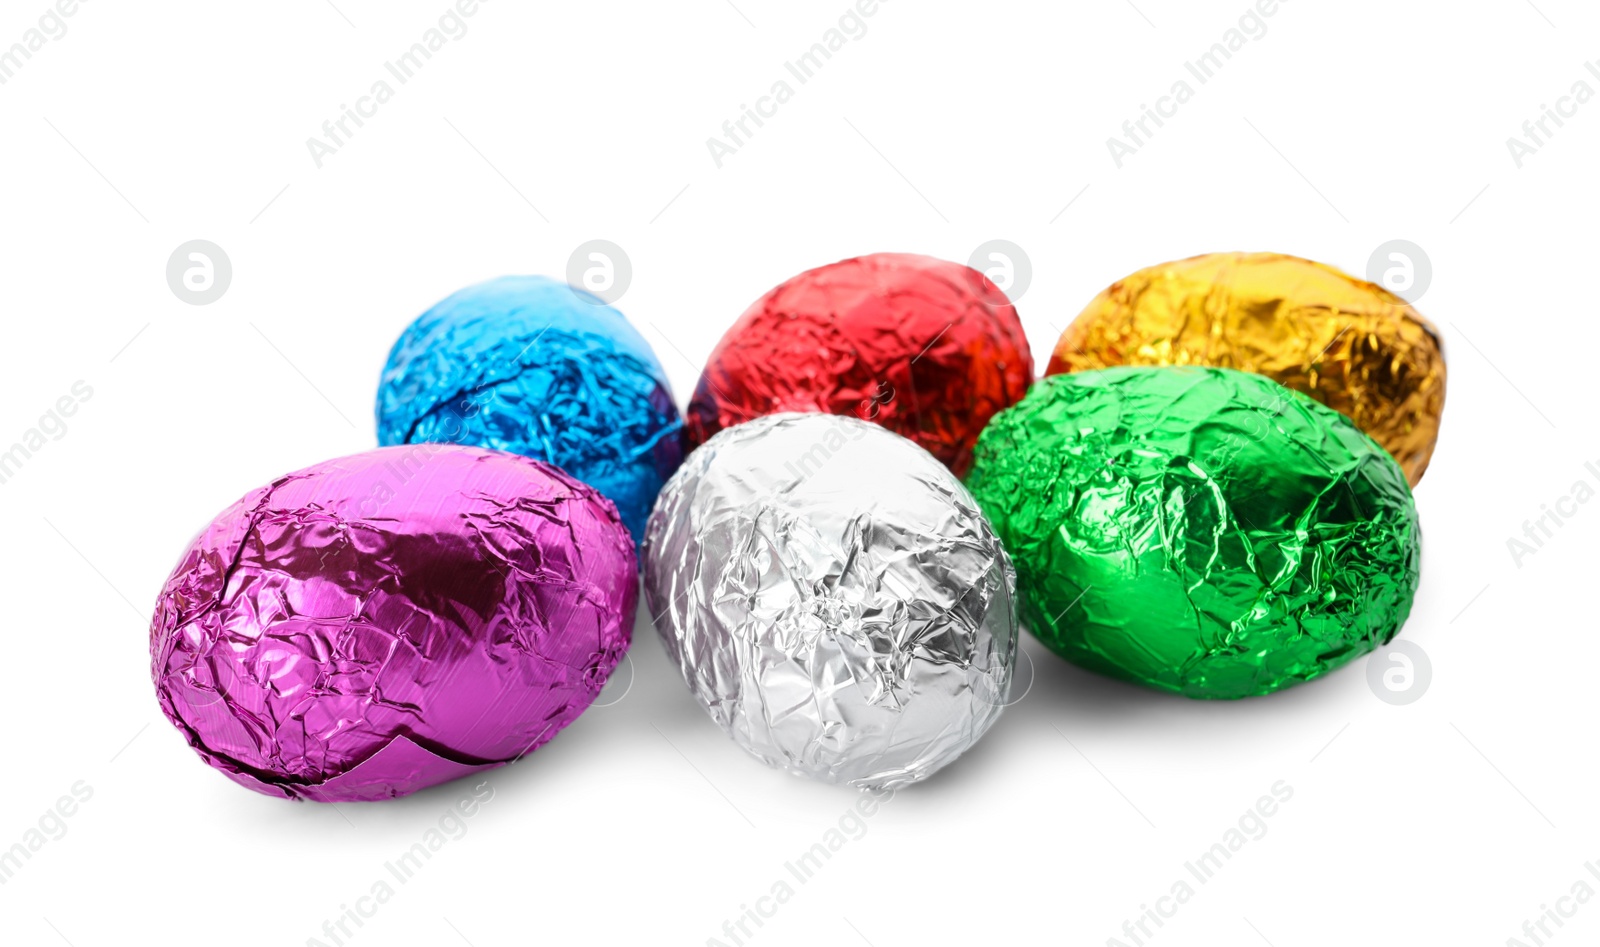 Photo of Many chocolate eggs wrapped in bright foil on white background